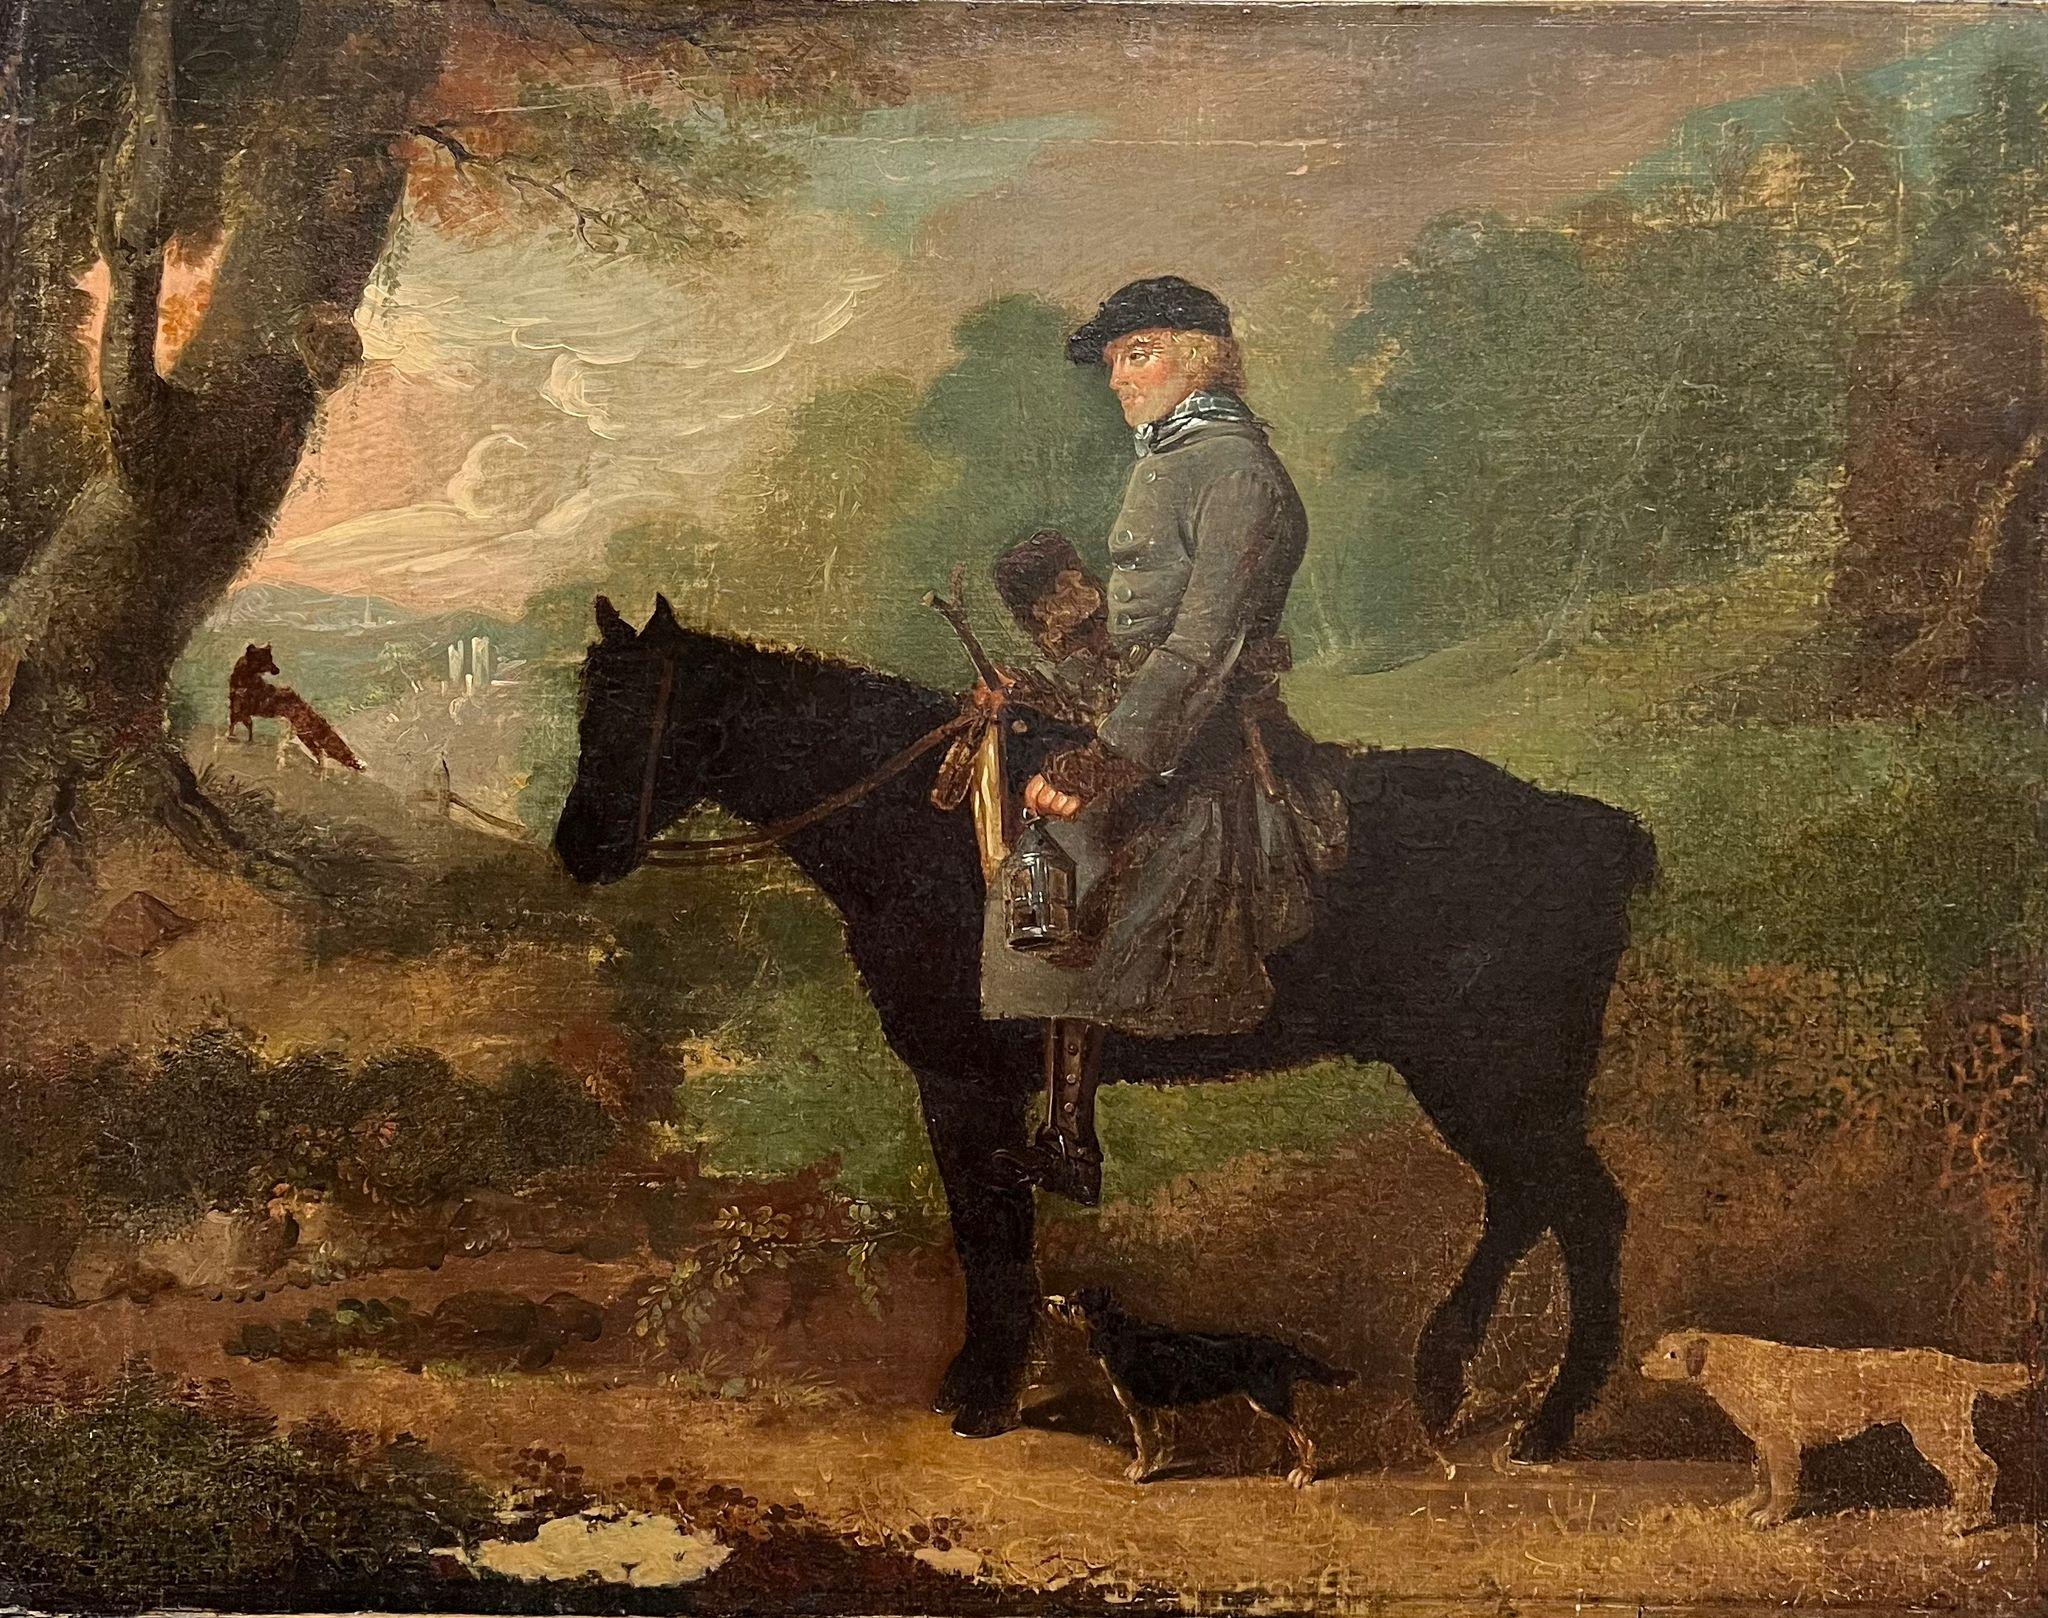 English 18th Century  Figurative Painting - Large 18th Century English Sporting Painting Country Squire Hunting Horse & Dogs